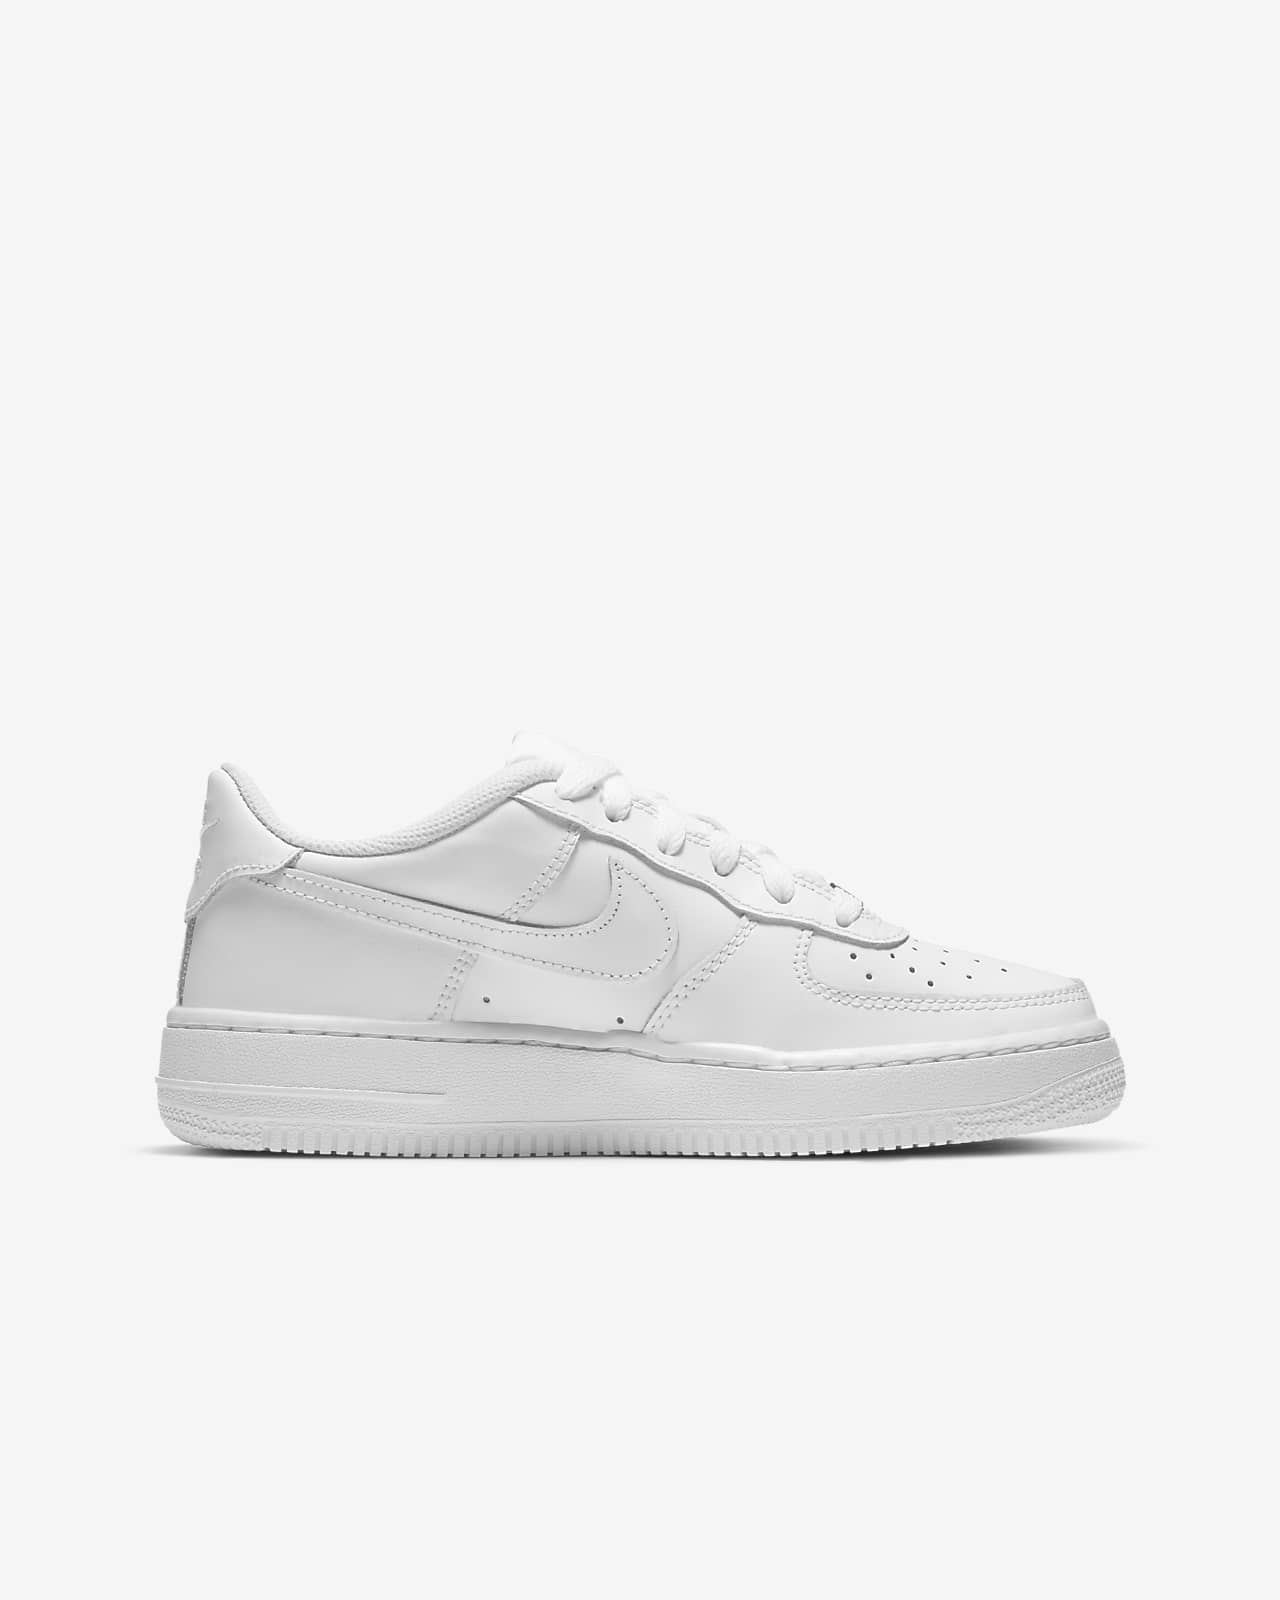 nike air force 1 color